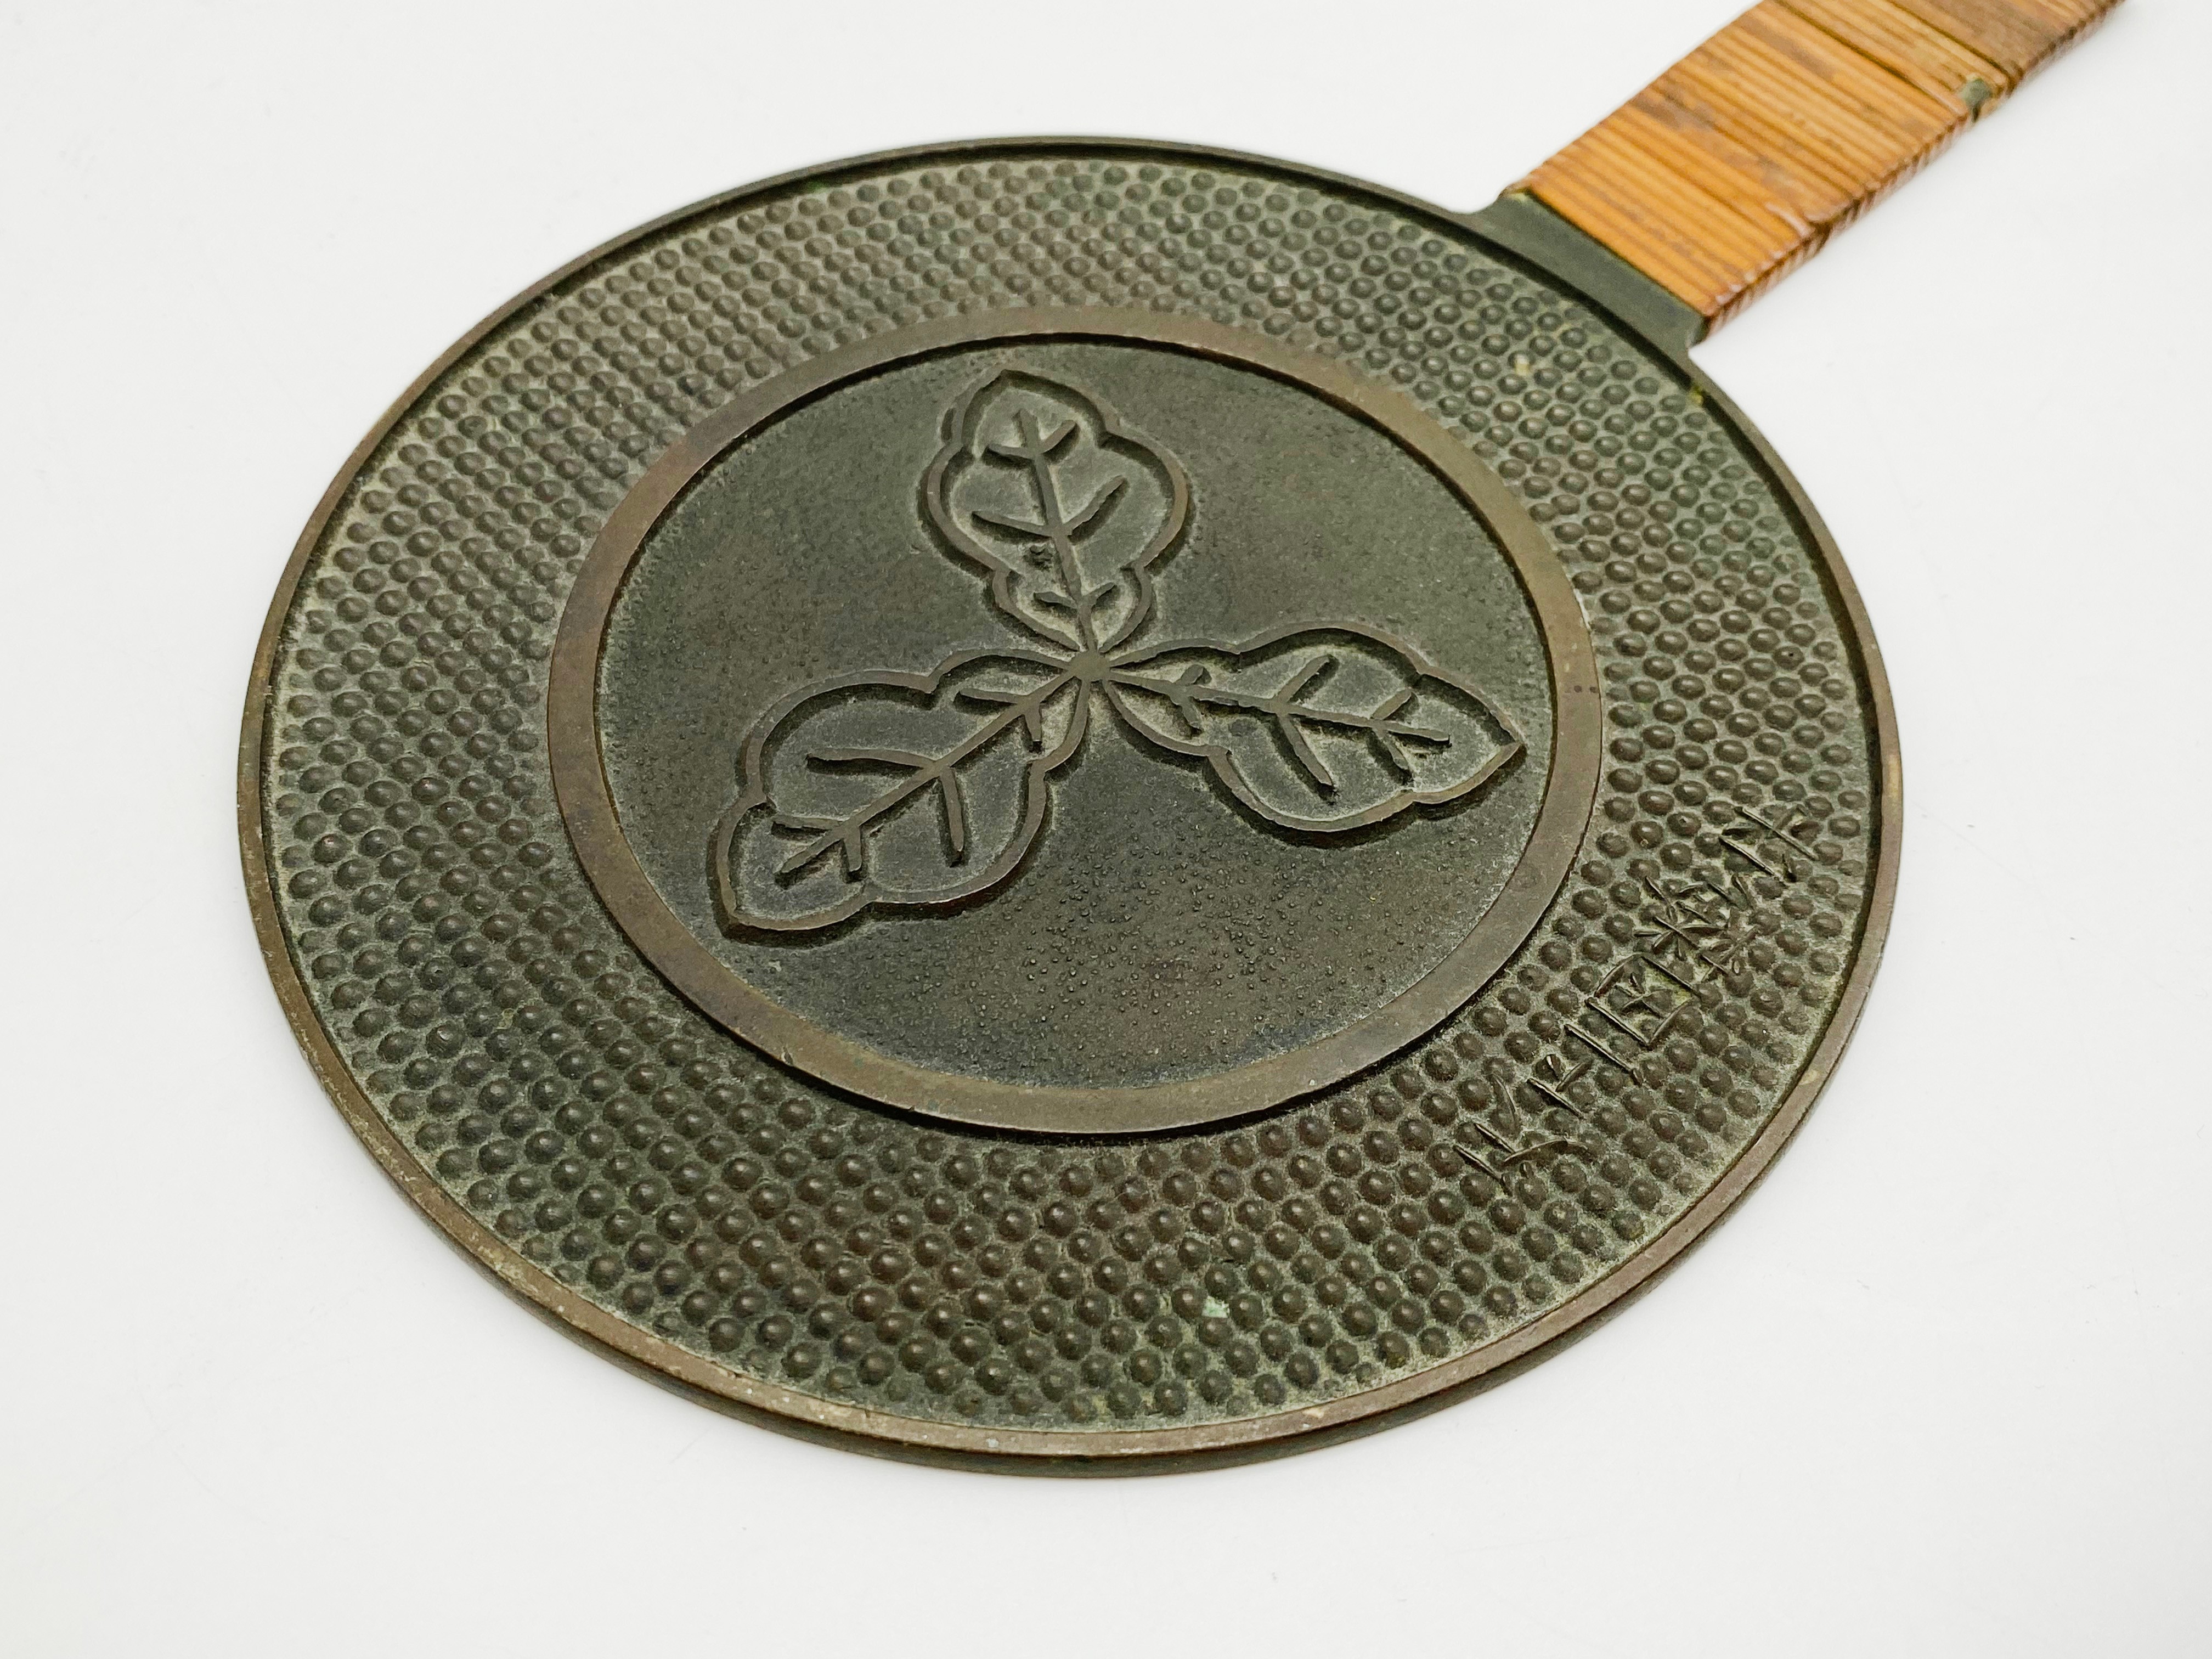 A 19TH-CENTURY JAPANESE BRONZE HAND MIRROR DECORATED TO THE REVERSE WITH A CLAN CREST (MON) - Image 3 of 4